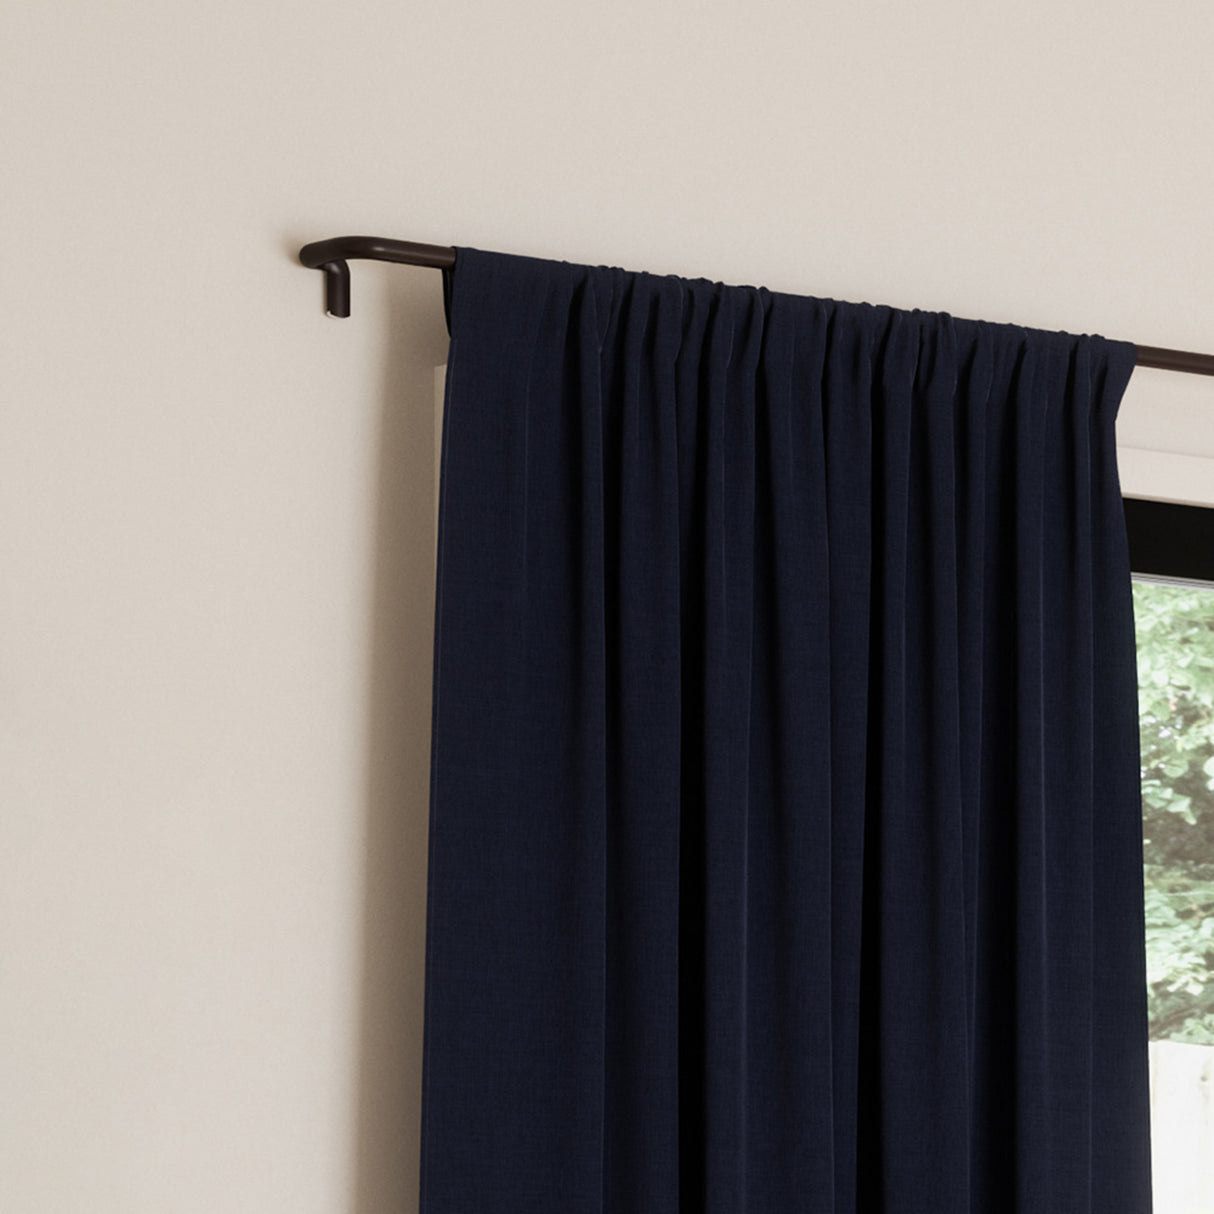 Alternative Solutions | color: Navy | size: 52x84" (132x213 cm) | Hover